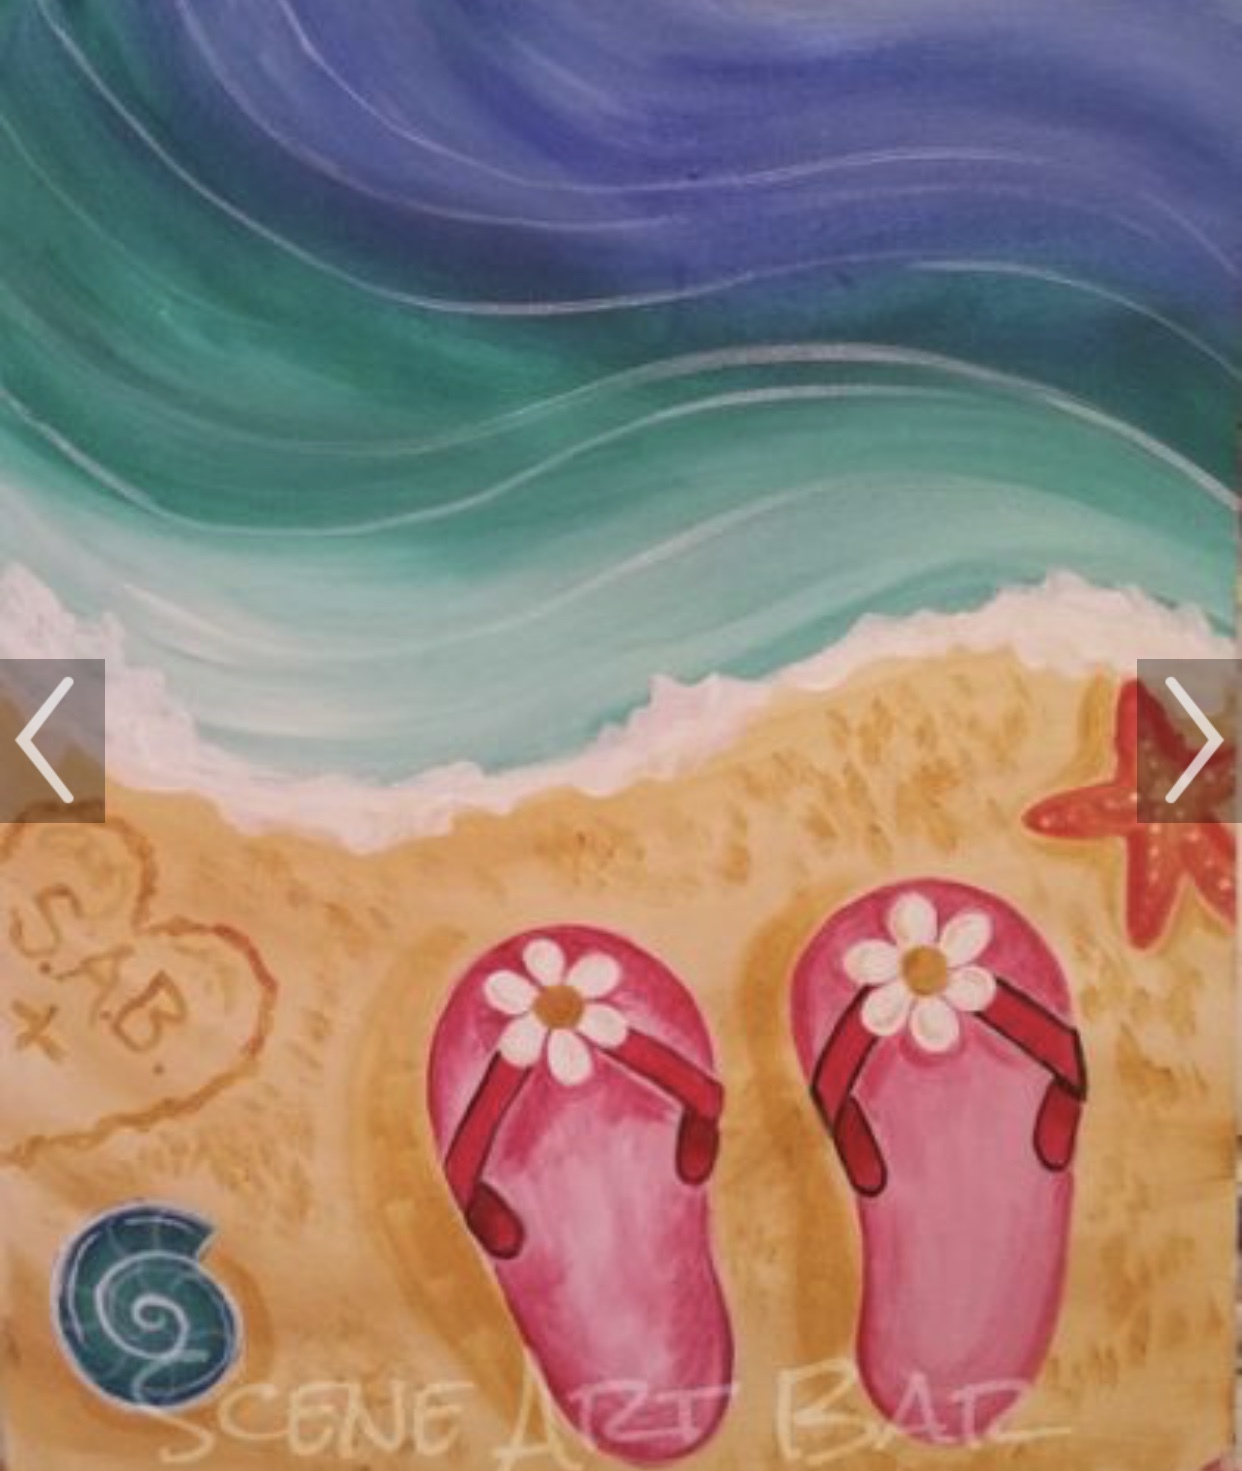 Participants in the Paint Night event will take home their own colorful beach painting.